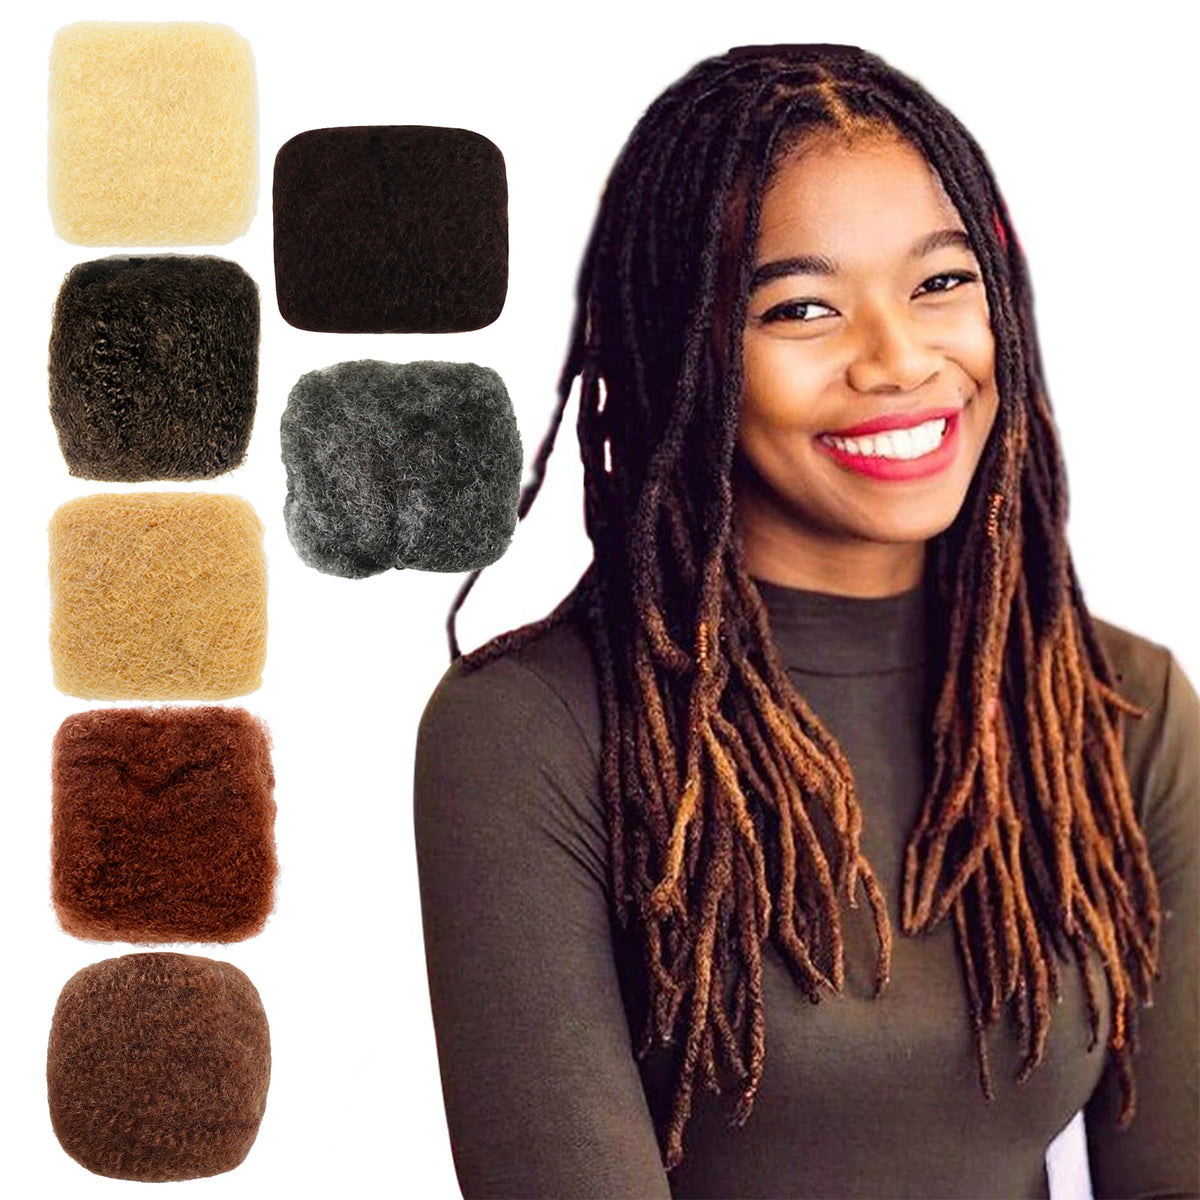 Afro Kinky Human Hairs For Making,Repairing & Bulking Locs 8 Inch Long Afro Kinky Bulk Human Hair For Dreadlock Extensions 100% Natural Afro Hairs For Twisting & Braiding 29g/1Oz (33/ Dark Auburn, 8 Inch)